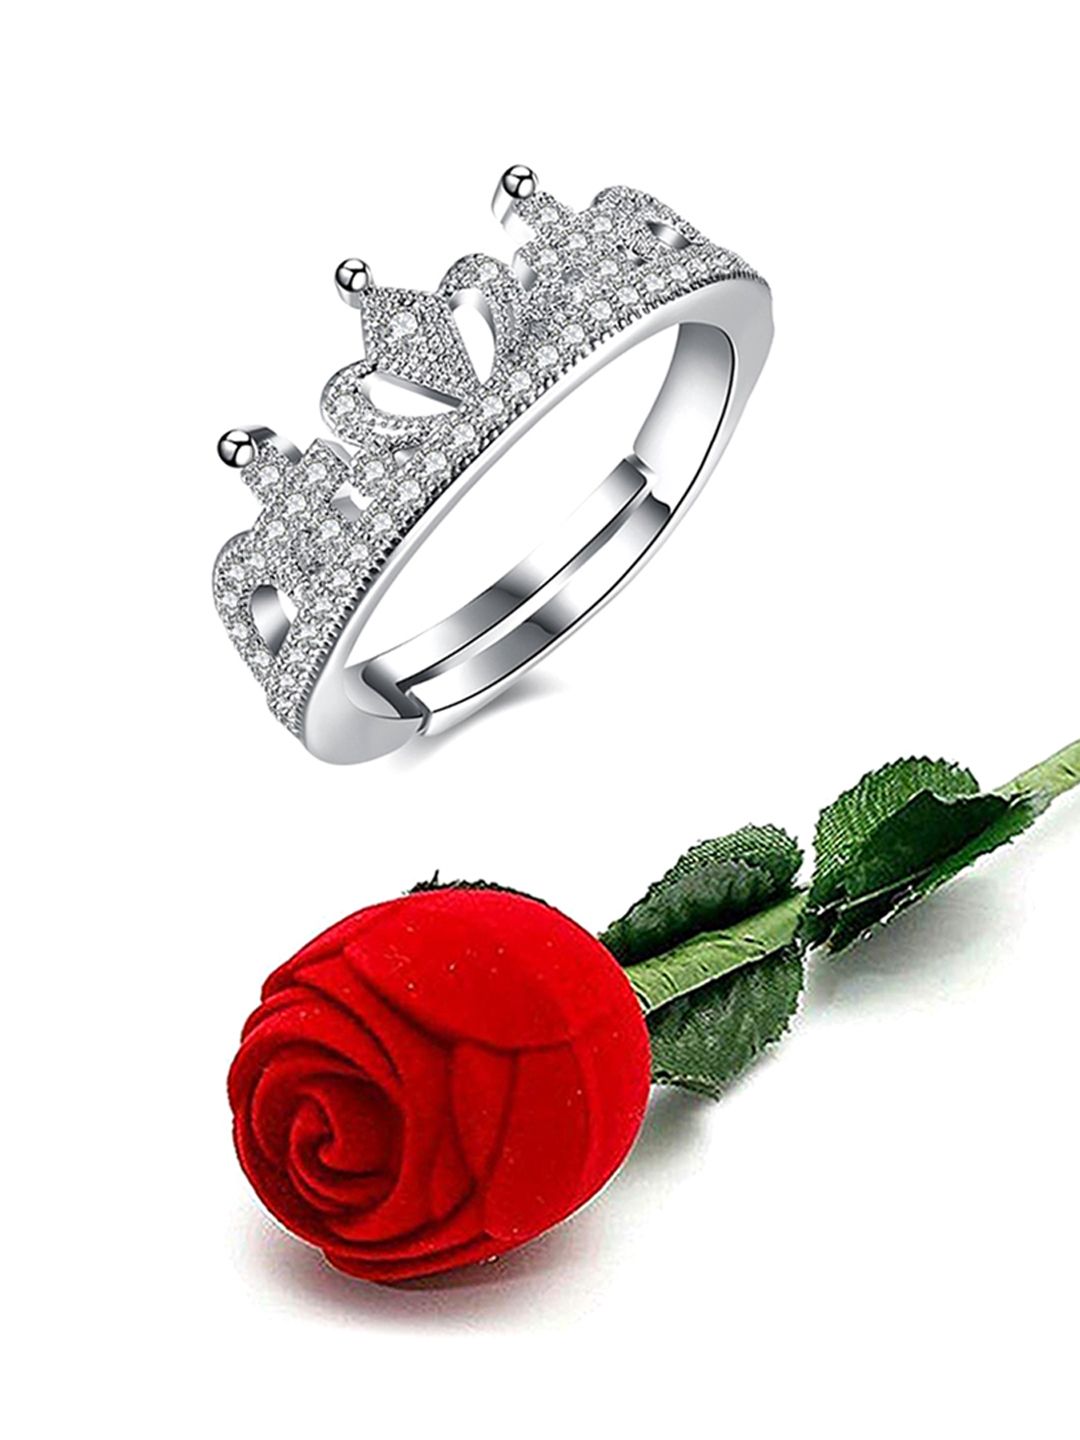 Yellow Chimes Silver-Plated Crown Crystal Ring in Velvet Rose Ring Box Price in India